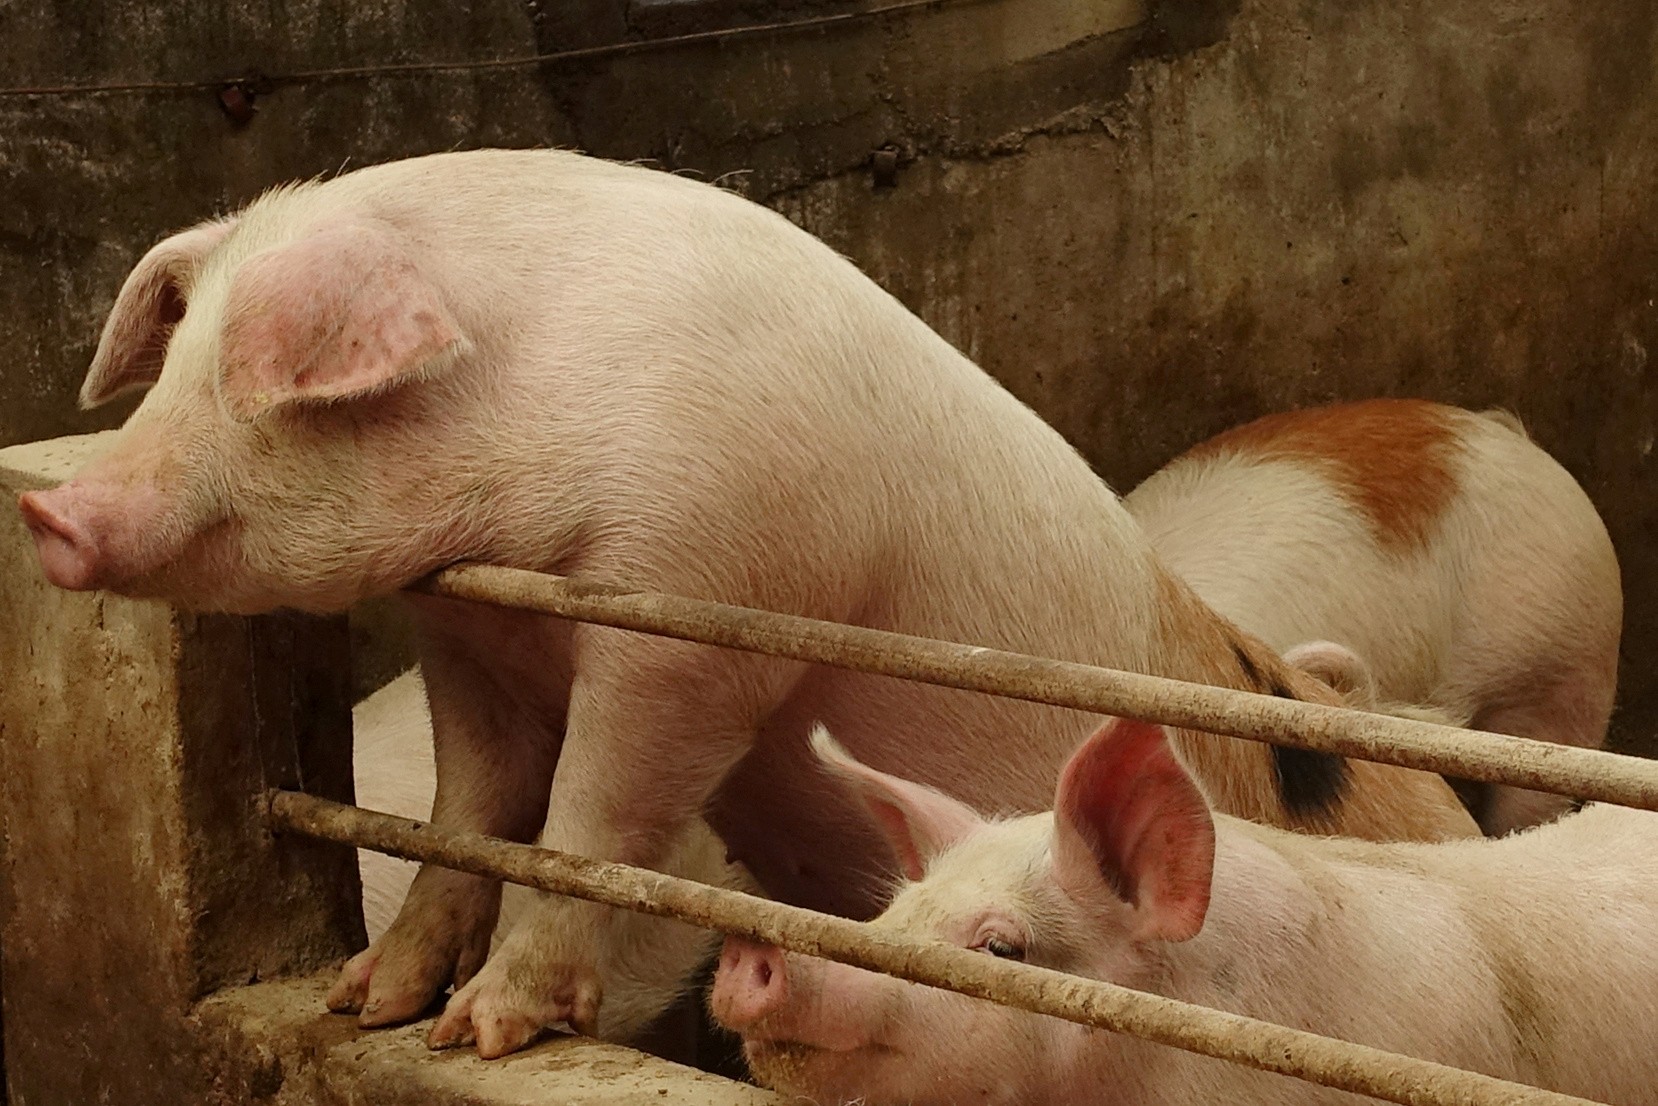 Pigs on a farm in Liaoning province, China. Photo: Reuters